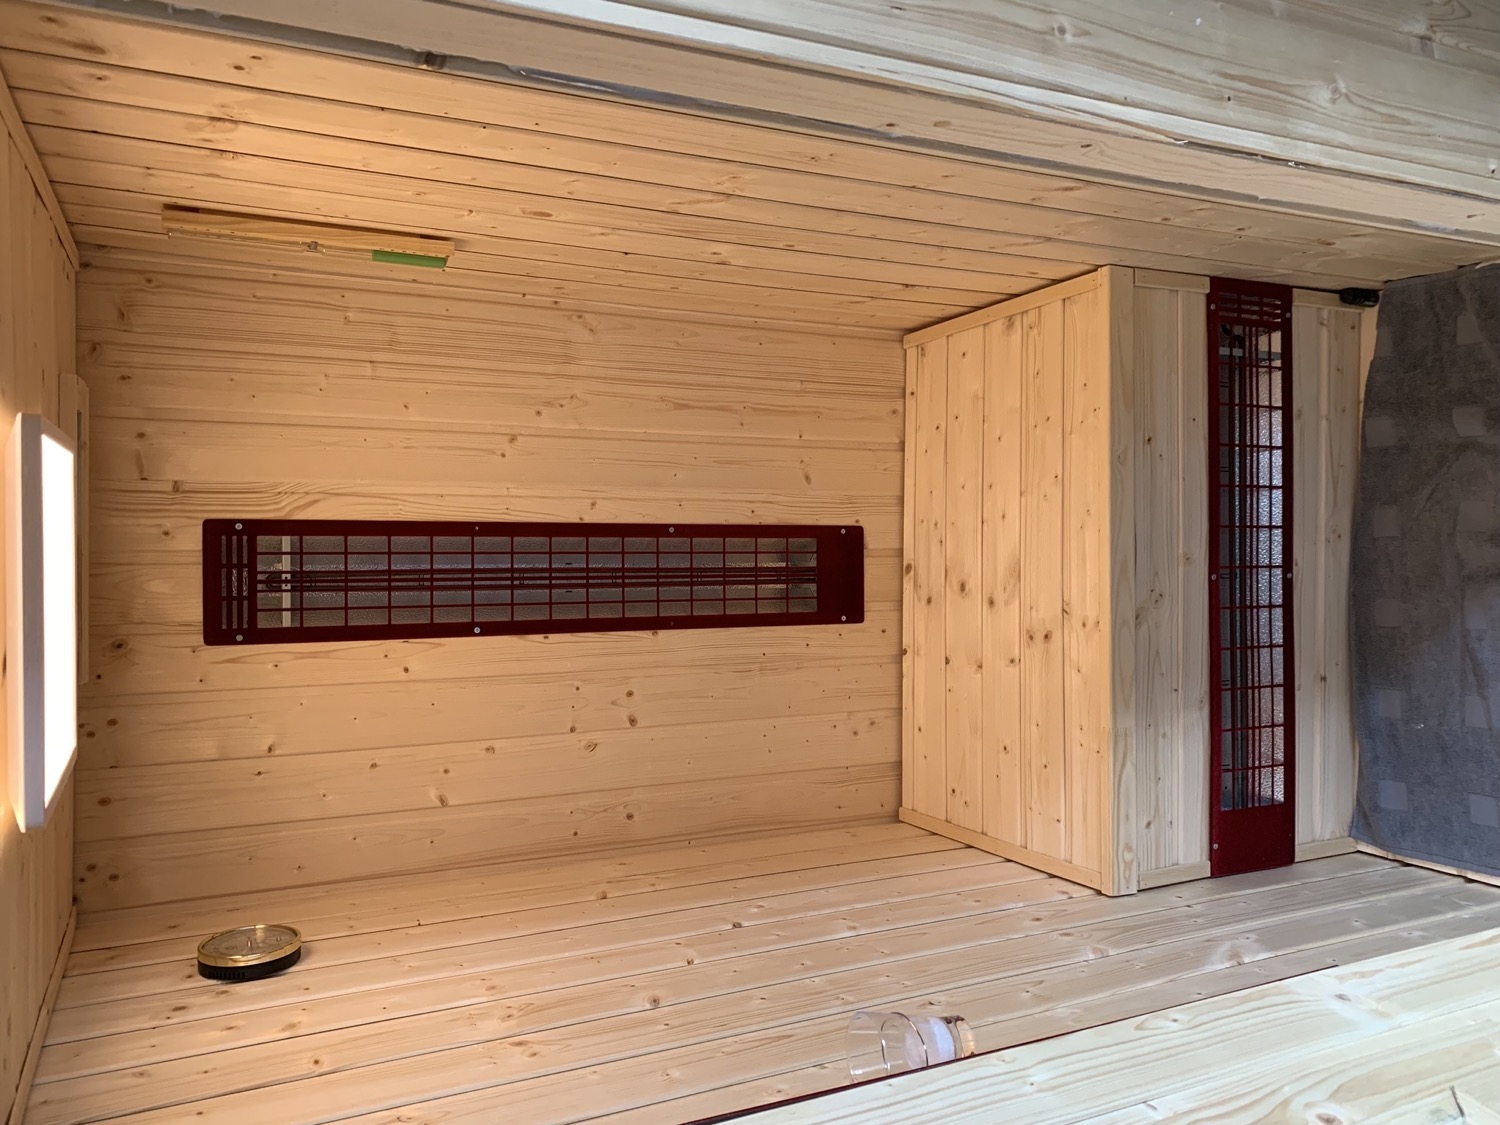 Inside view of the sauna.